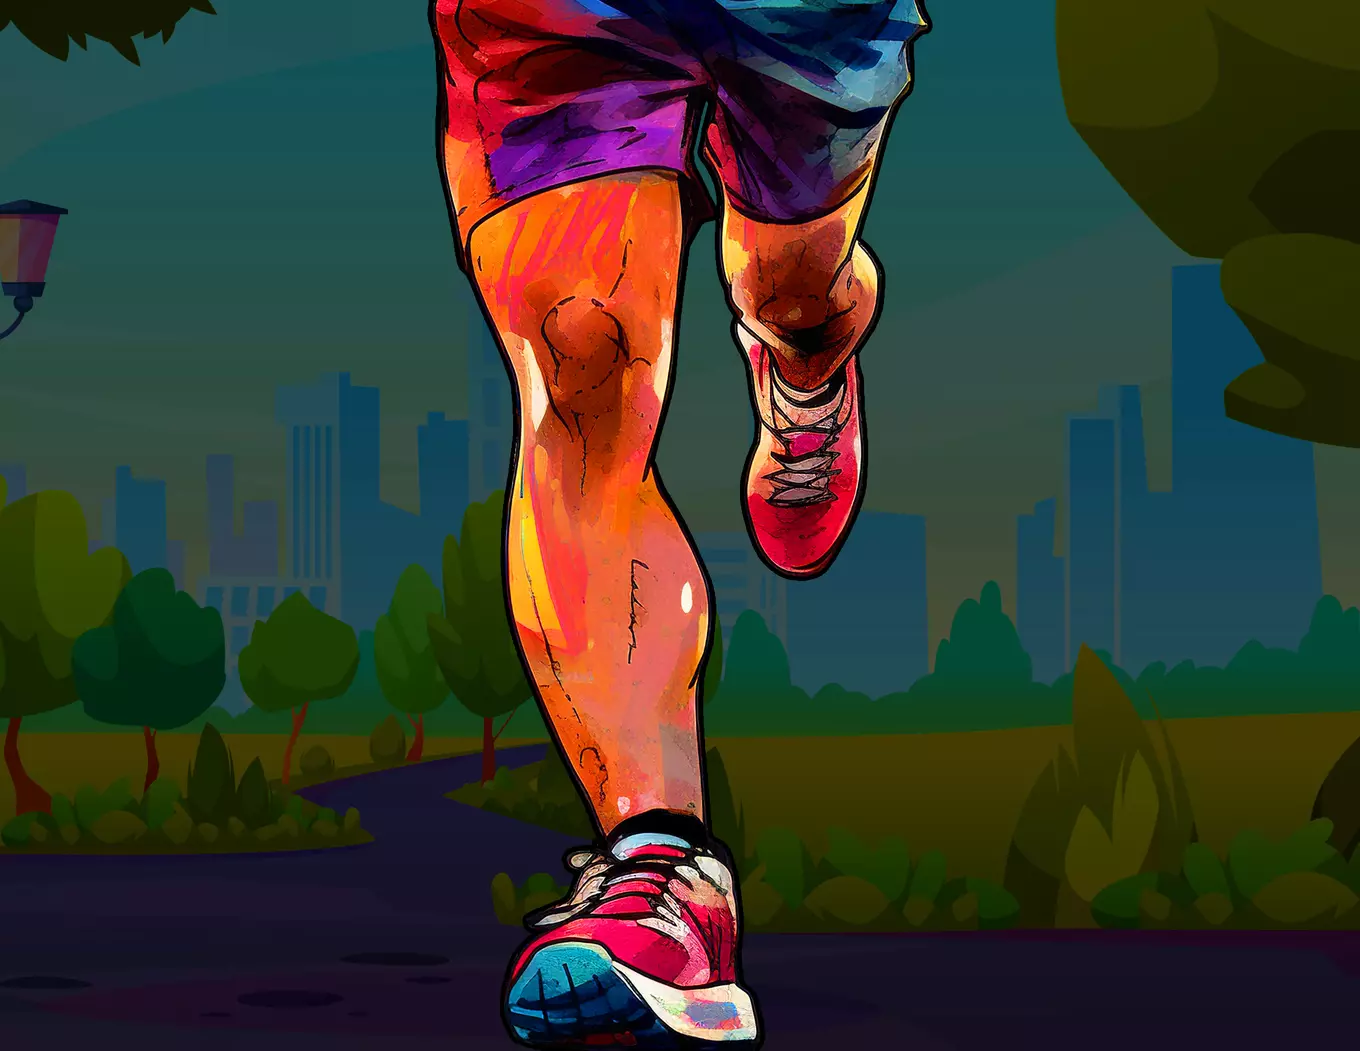 An artistic depiction of someone running in the park.